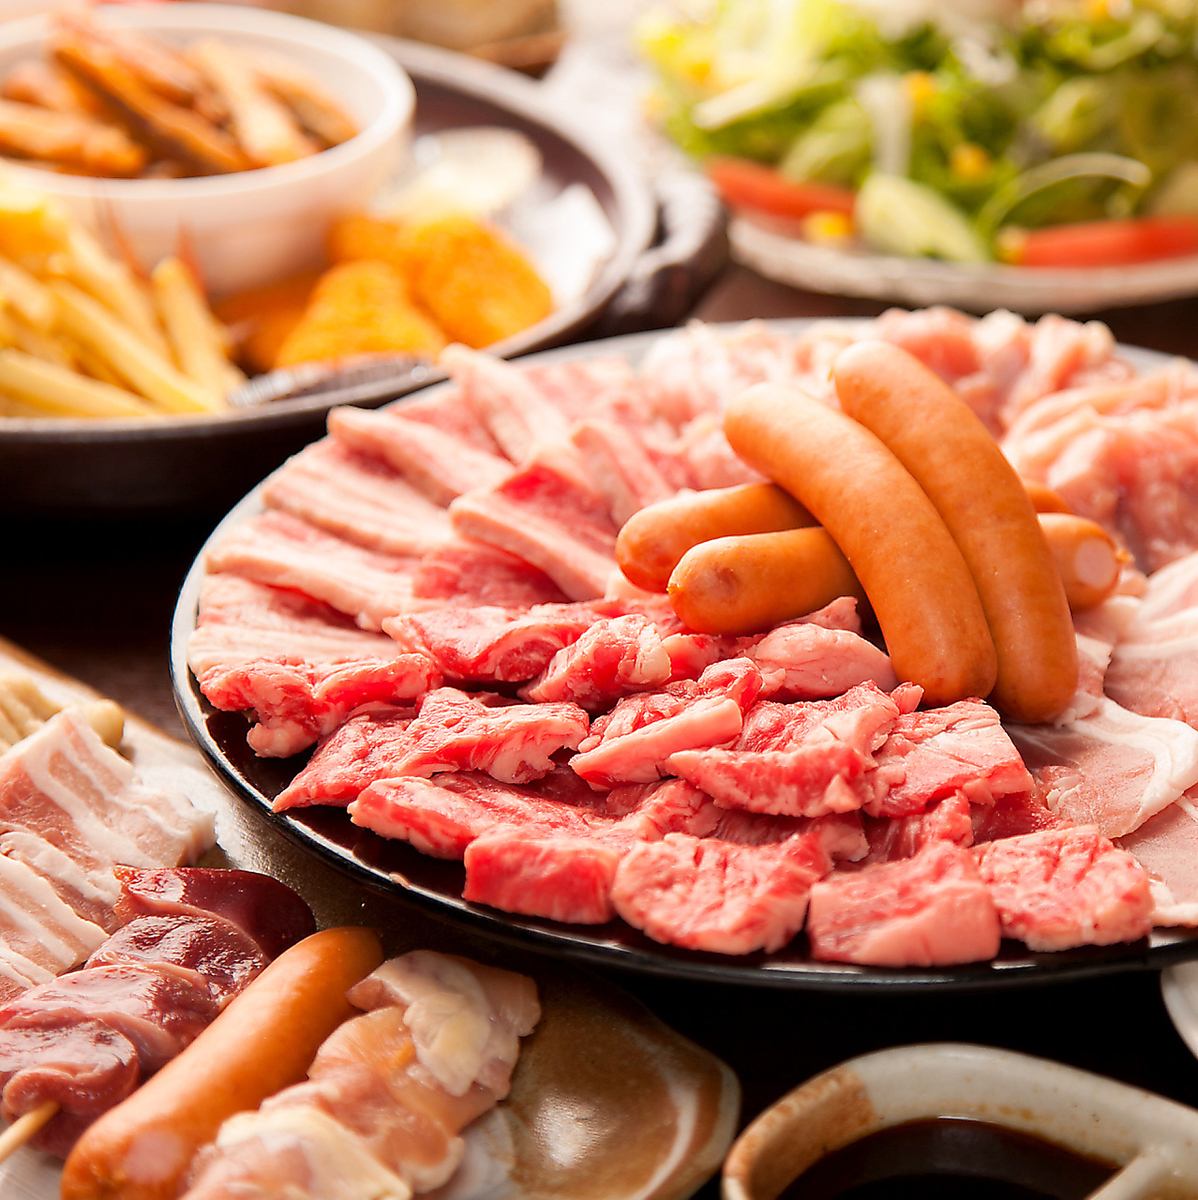 All-you-can-eat and drink starting from 2,000 yen♪ It's the best value for money!